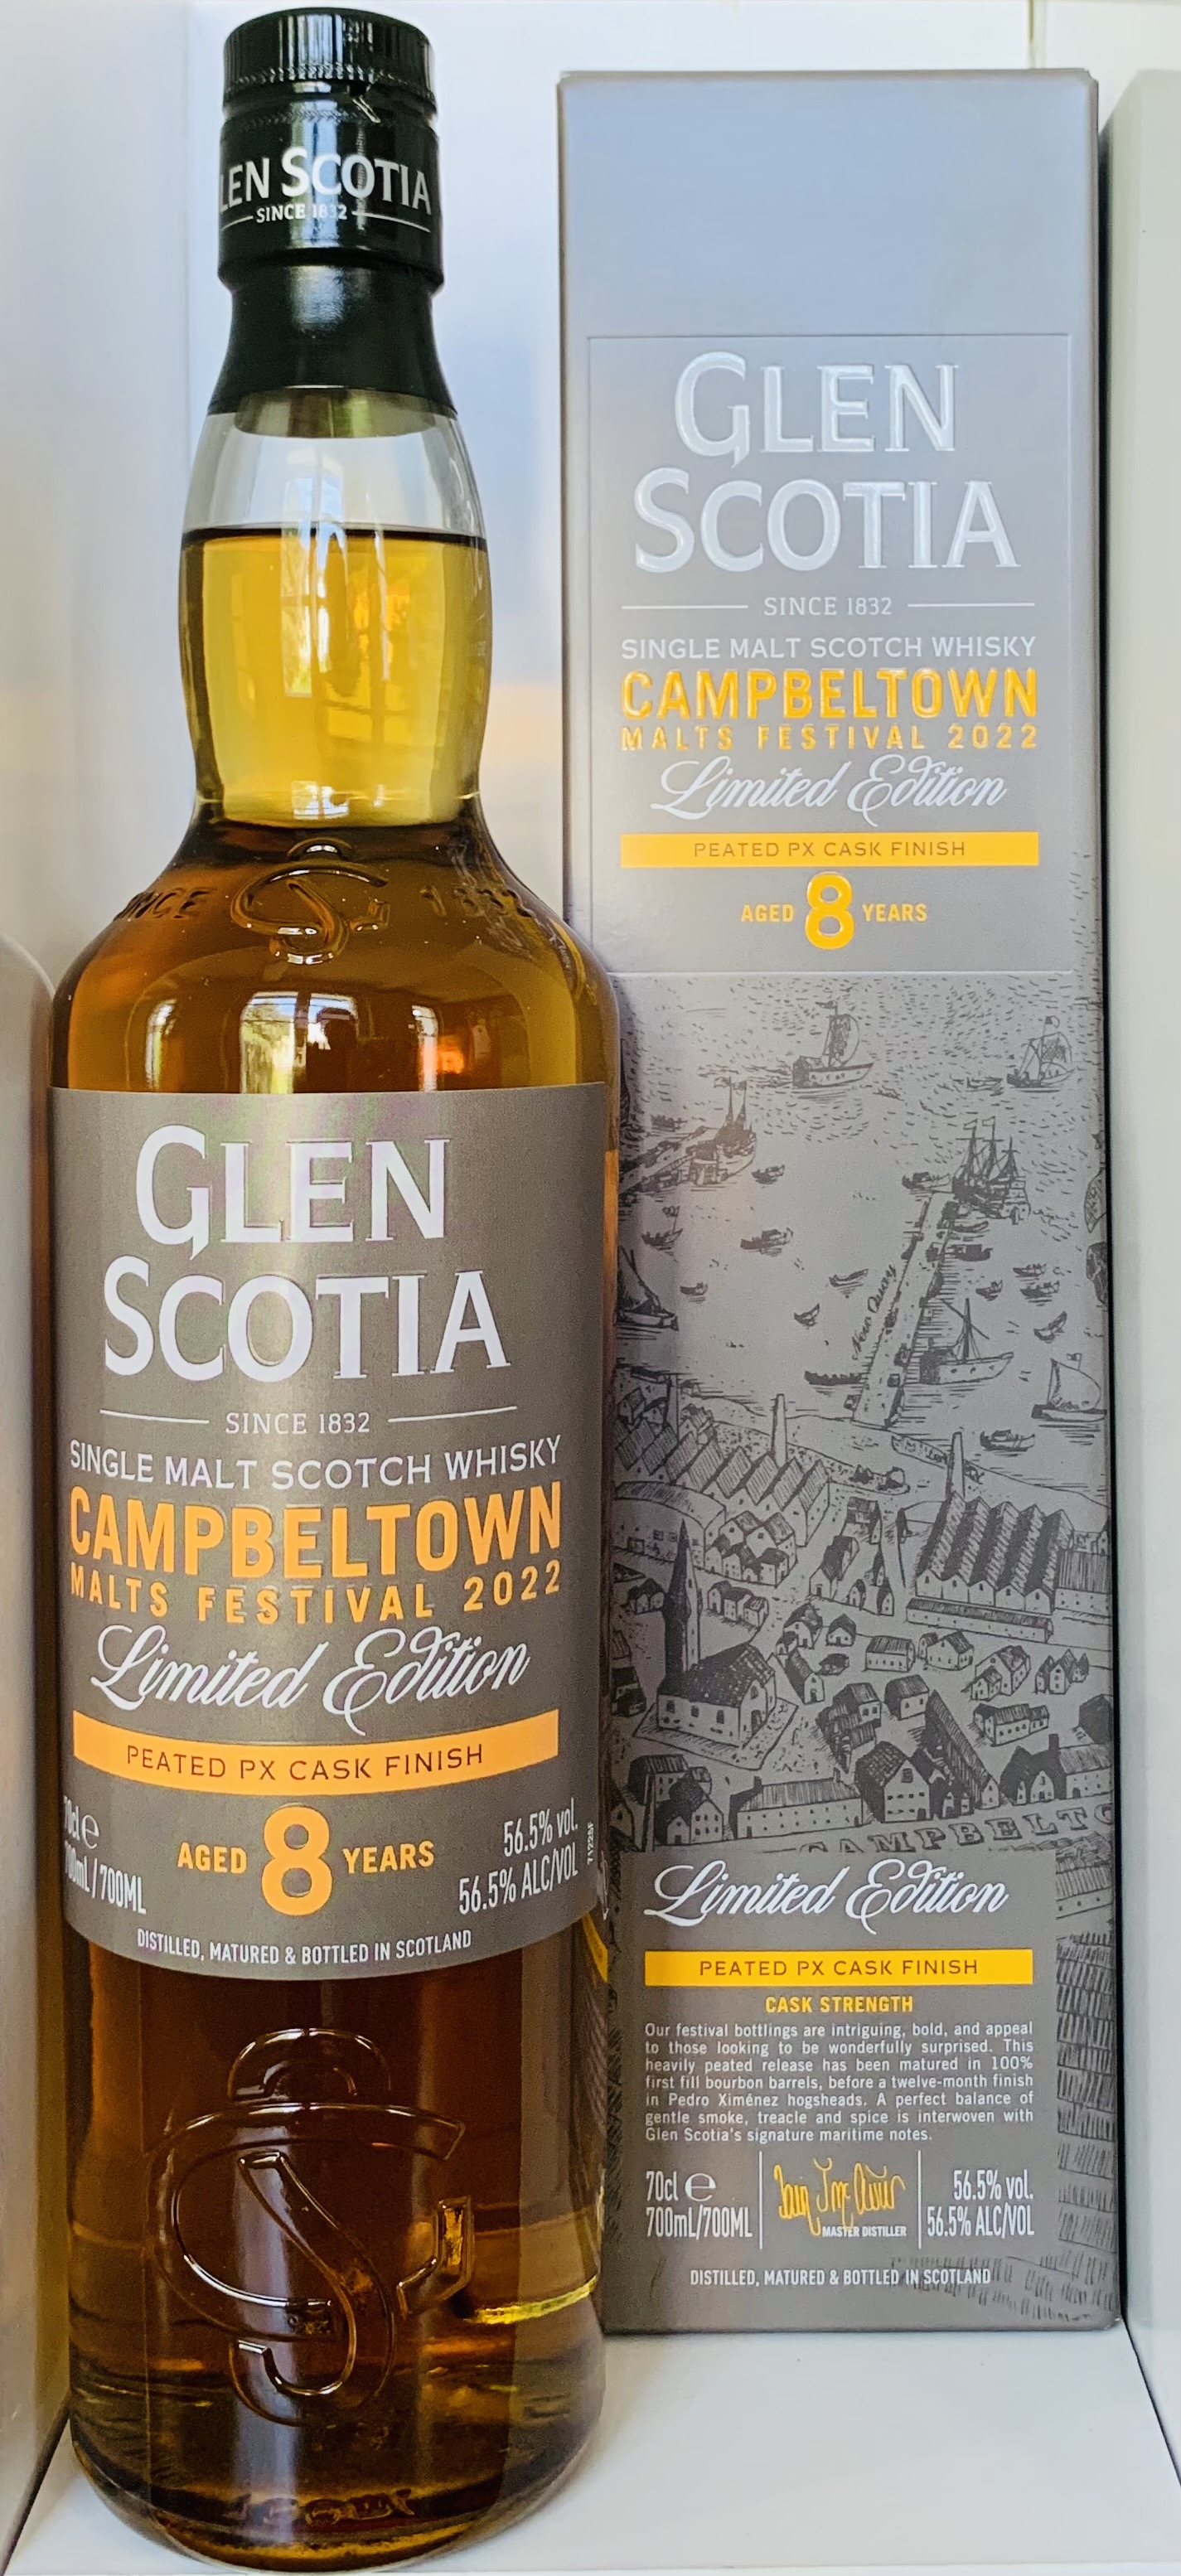 Glen Scotia 8 Jahre Peated PX Sherry Finish Campbeltown Malts Festival 2022